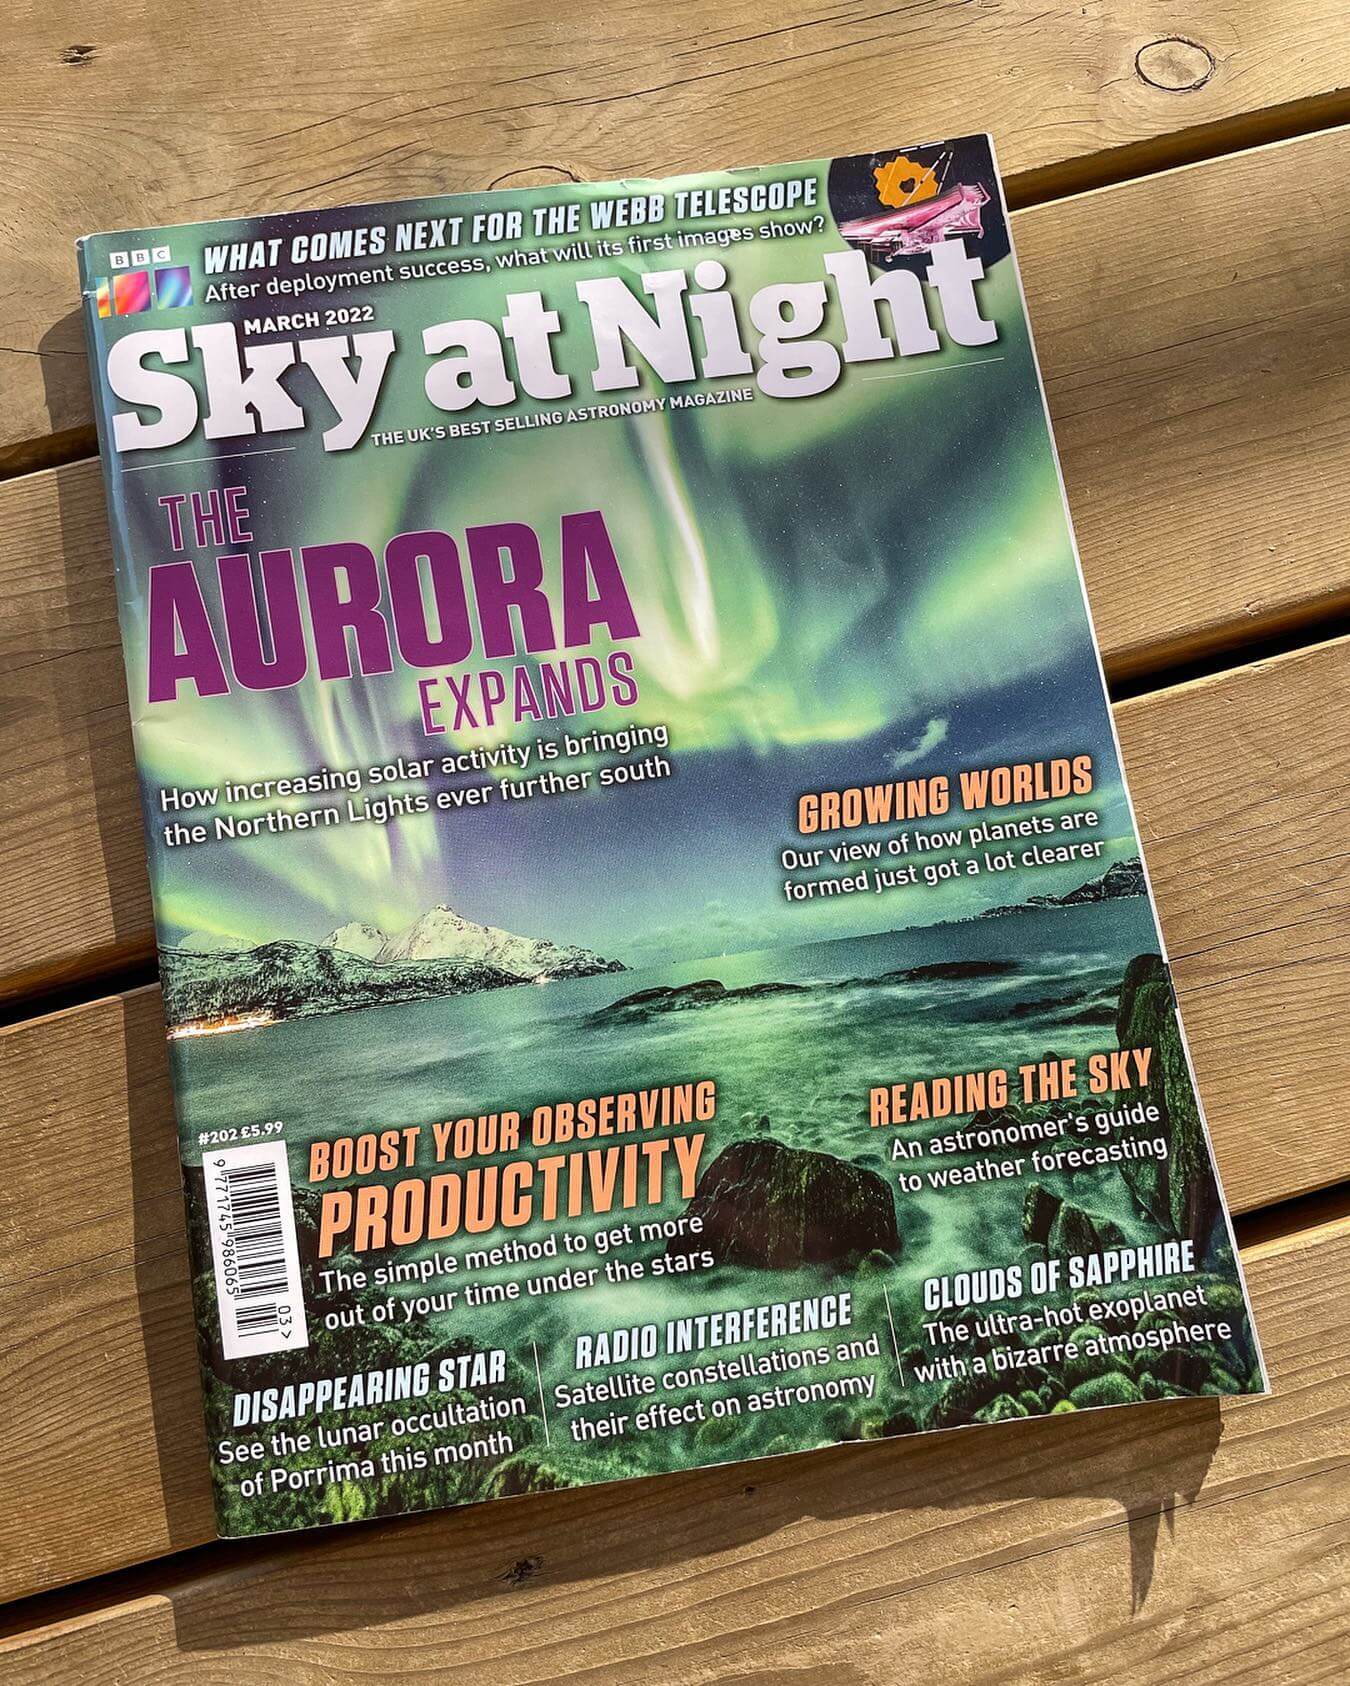 Our photo got featured in BBC magazine. 🥳 @bbc 
We don’t send out our photos to be posted,but when we get asked we are glad to share. ❤️
•
•
•
•
•

#tromsø #northernnorway #visittromso #northnorway2day #northernlights #tromsolove #naturephotography #lovenature #aurora #worldaurora #norge #norgefoto #worldaurora #visitnorway #auroraborealis #ig_nordnorge #canon #mittnorge #norwayphotos #auroraborealblog #norway #dreamchasersnorway #thebestofnorway #tromsomoment #ig_auroraborealis #natgeotravel #nortrip #bbc #magazine #skyatnight